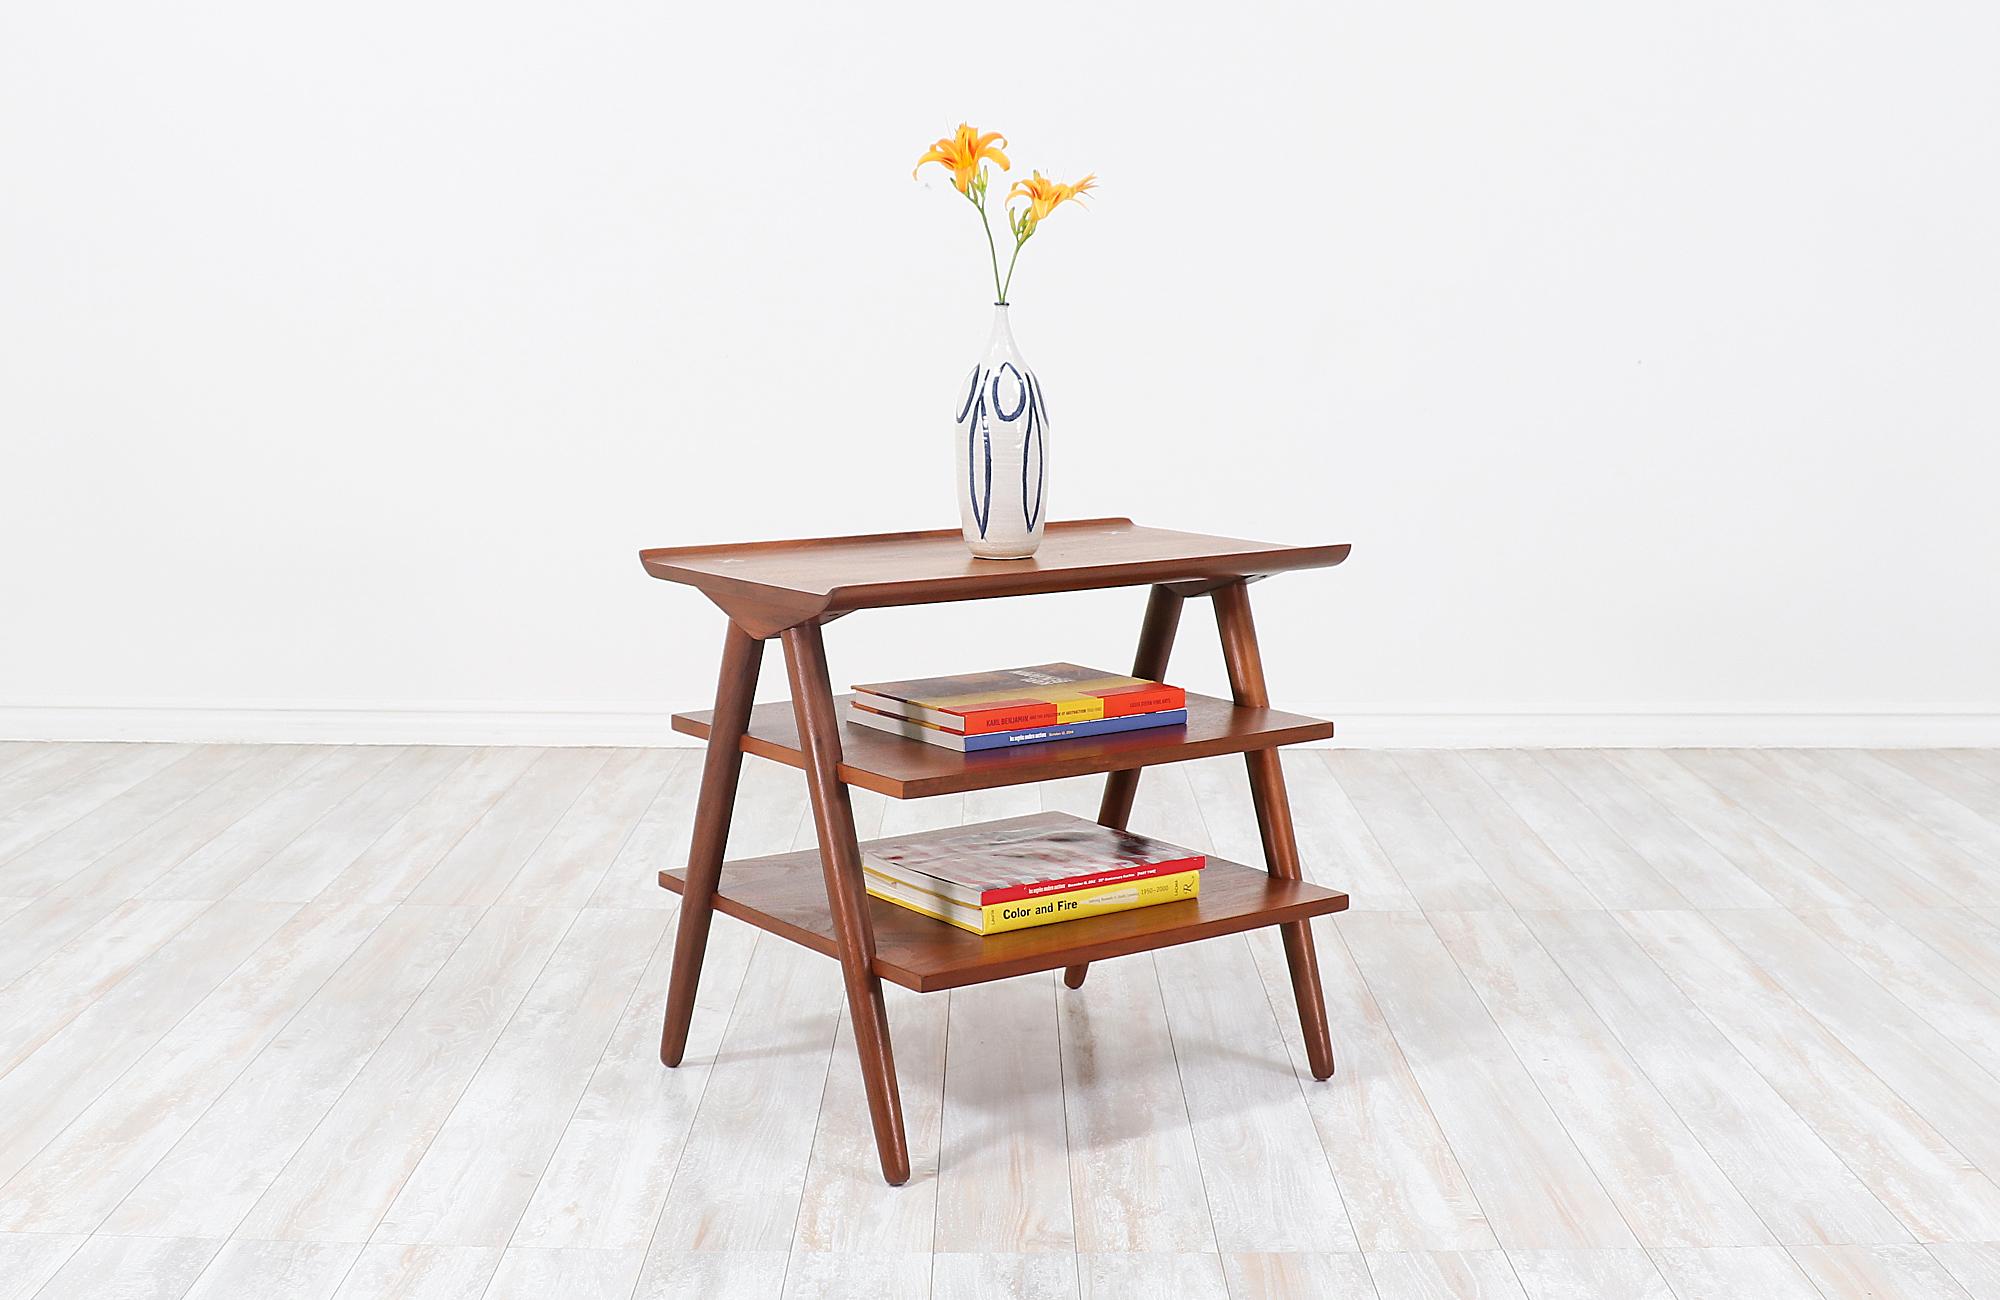 Mid-Century Modern side table designed by Merton Gershun and manufactured by American of Martinsville in the 1960s. Constructed from solid walnut, this sculpted side table features a flight of 3-tier shelves and a raised edge on the top tier while